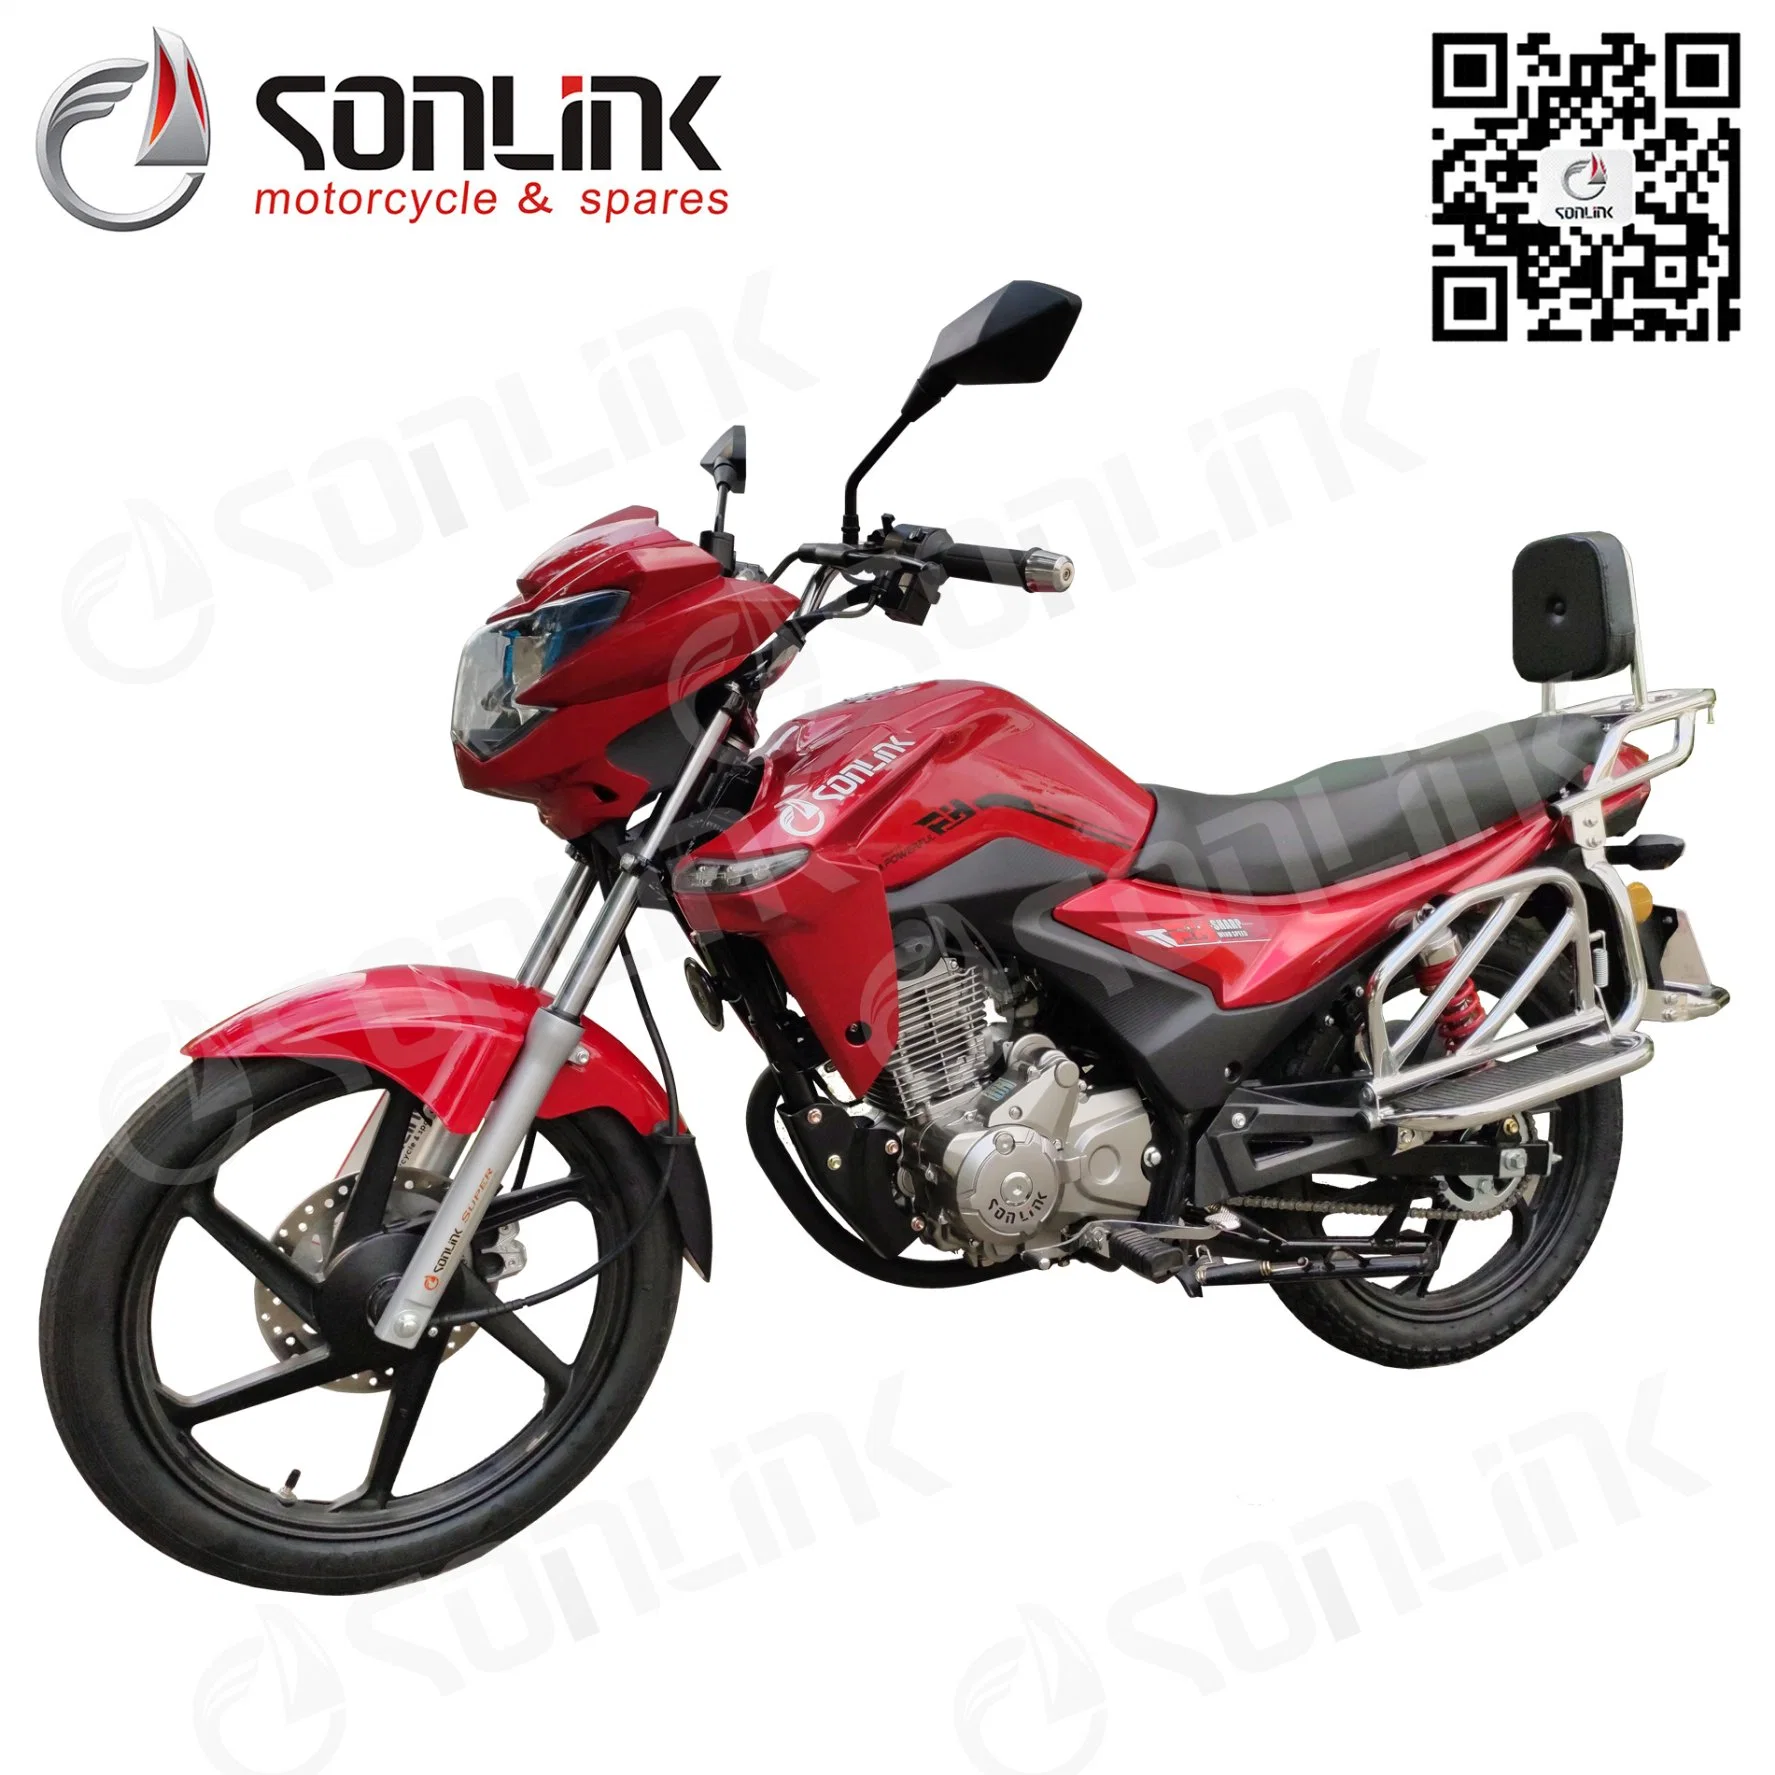 New Modle Cross-Country off Road Street Racing 125cc Motorcycle/150cc Motorbike/200cc Dirtbike (SL150-3G)